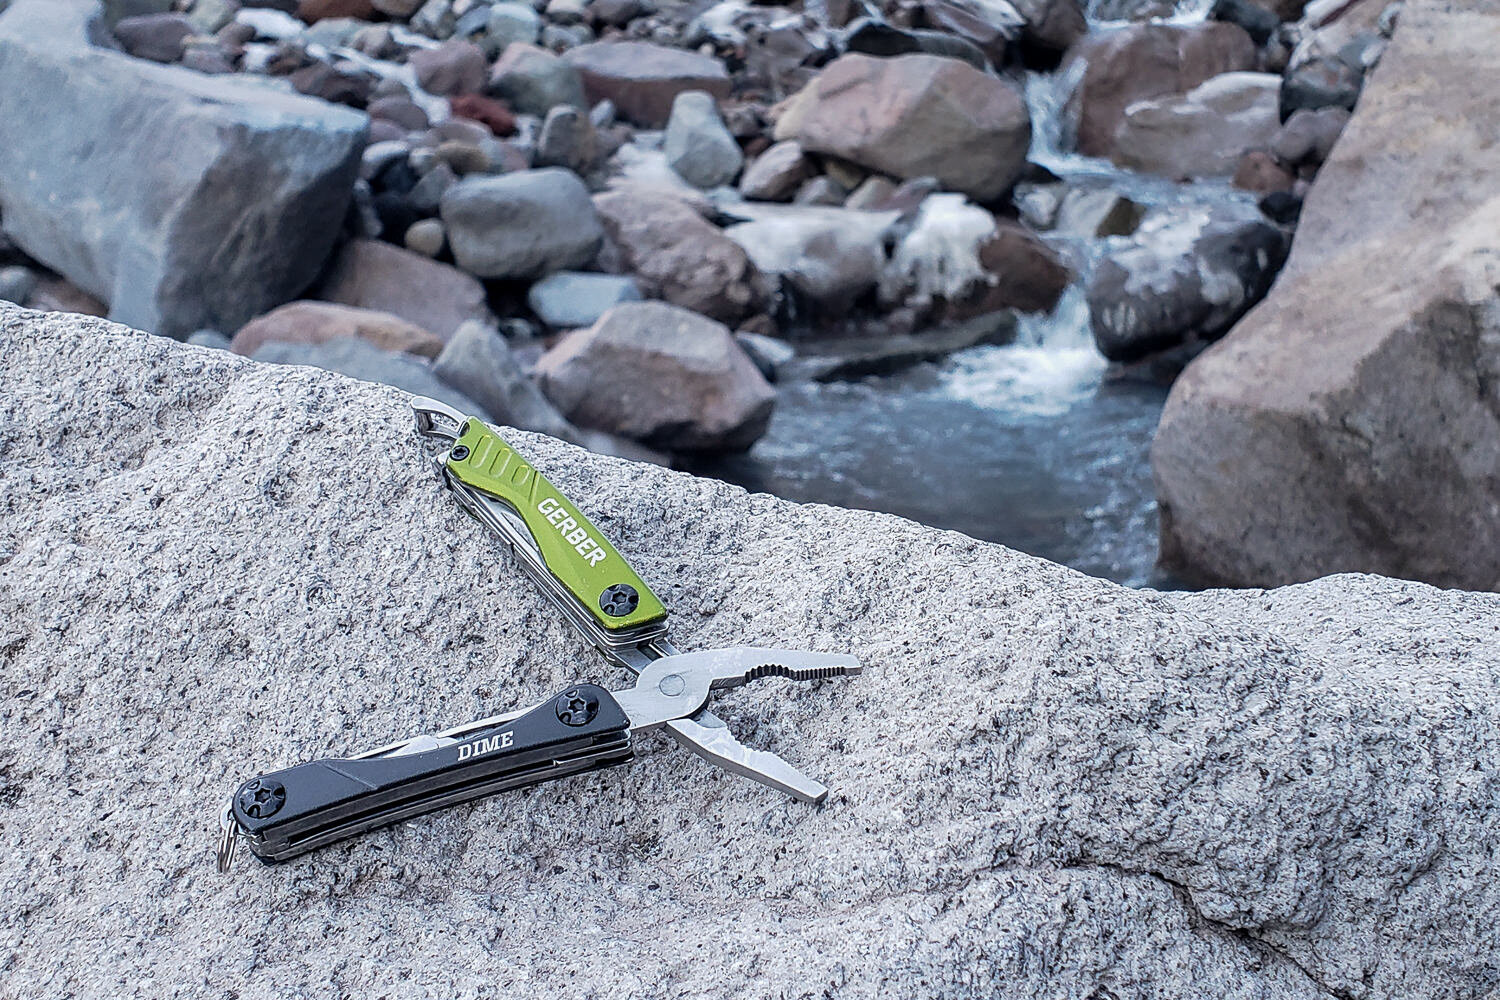 The Gerber Suspension NXT is affordable and compact enough to carry with you anywhere.